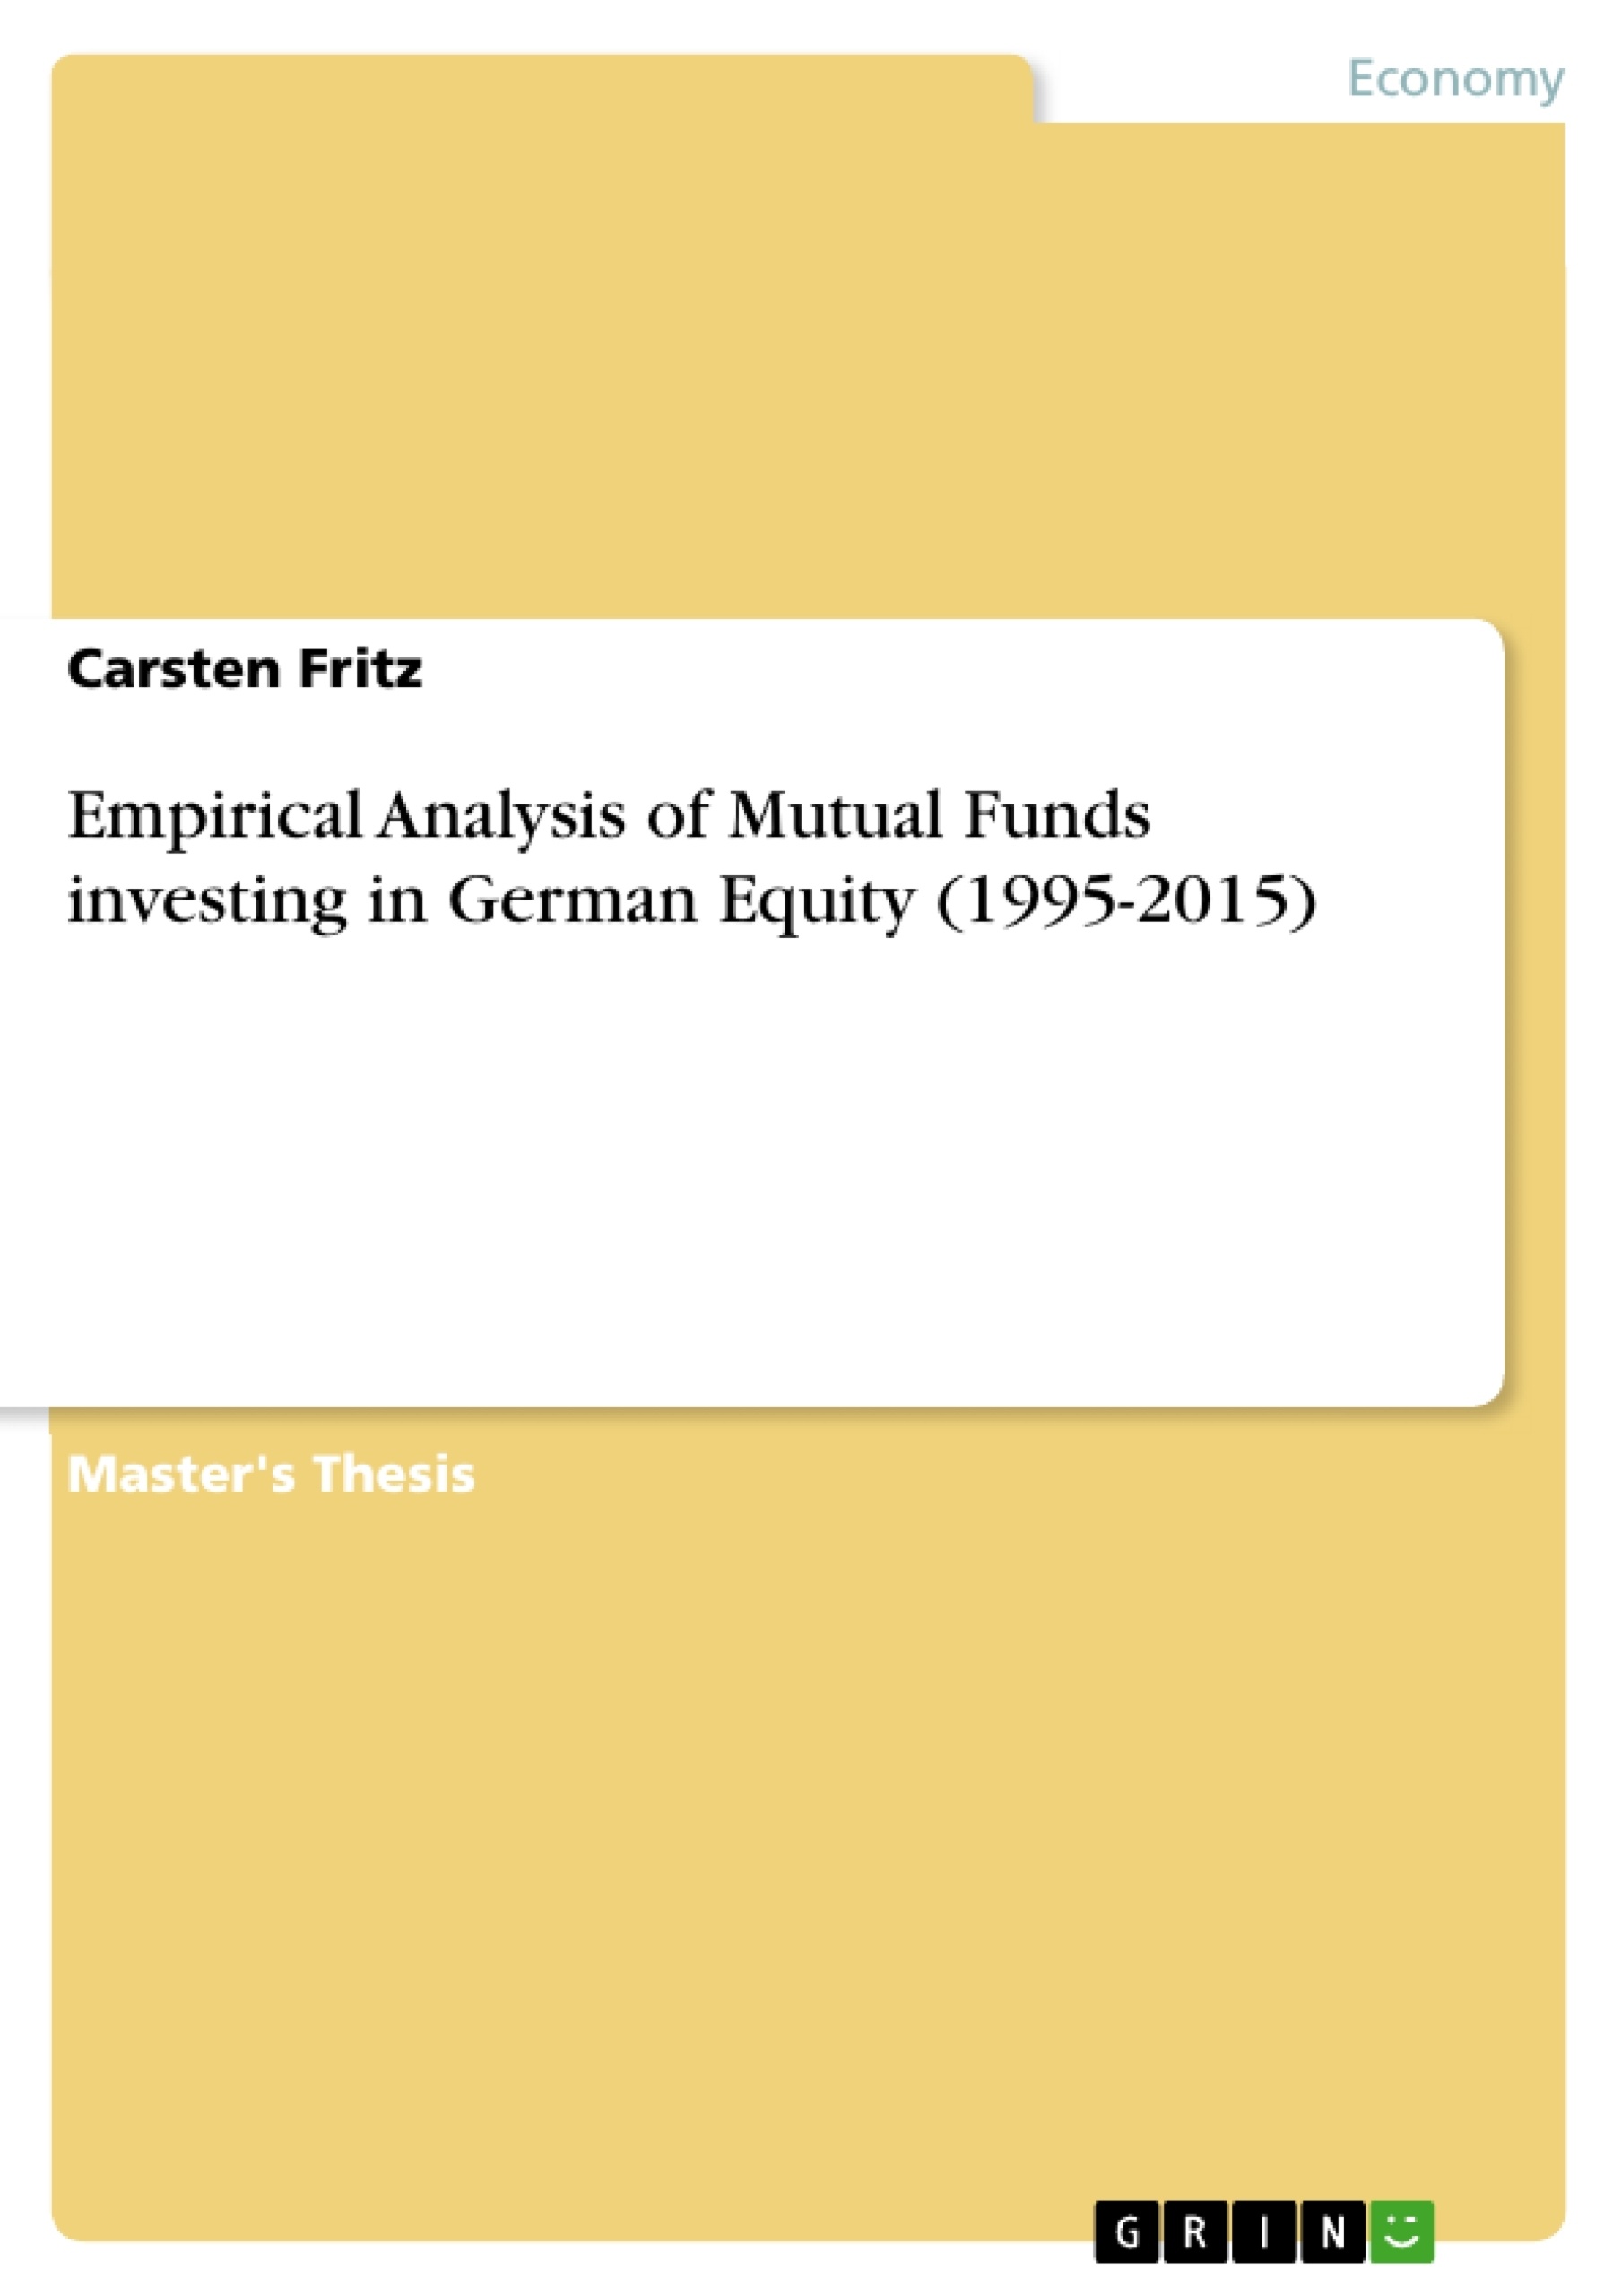 Título: Empirical Analysis of Mutual Funds investing in German Equity (1995-2015)